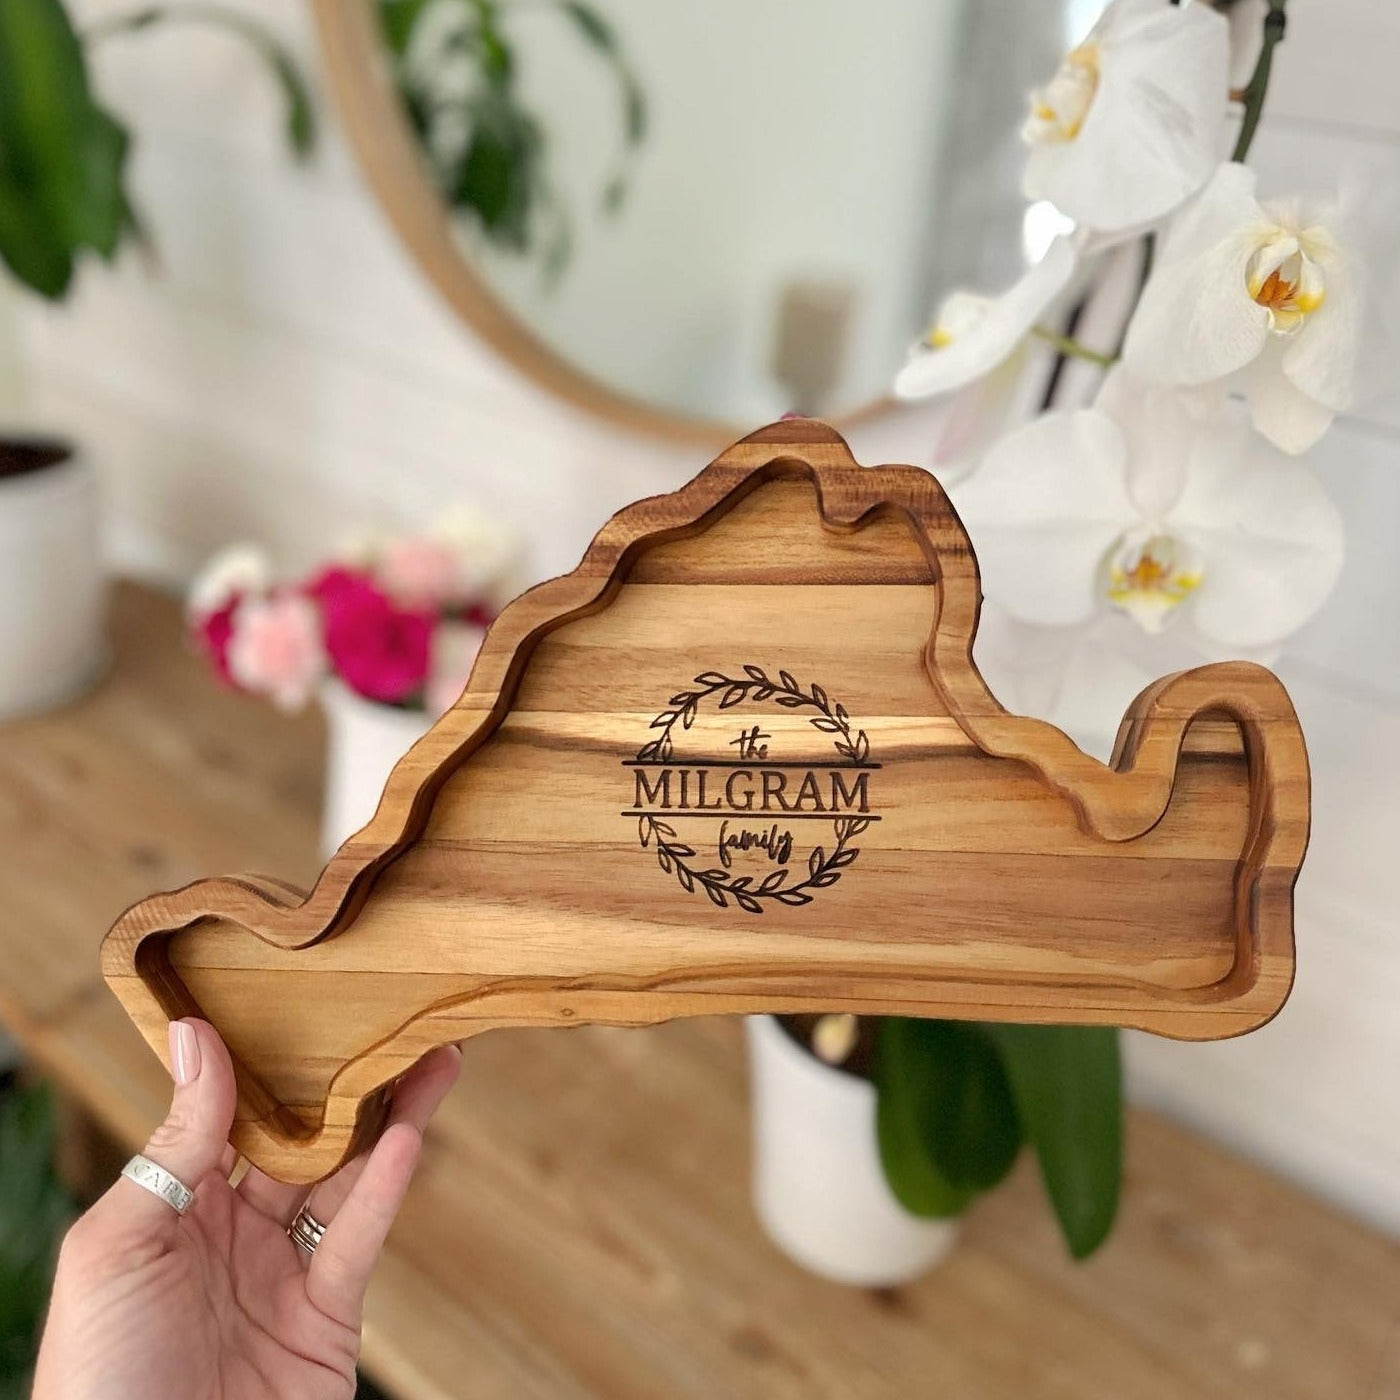 Marthas Vineyard shaped tray with a wreath and family name engraved